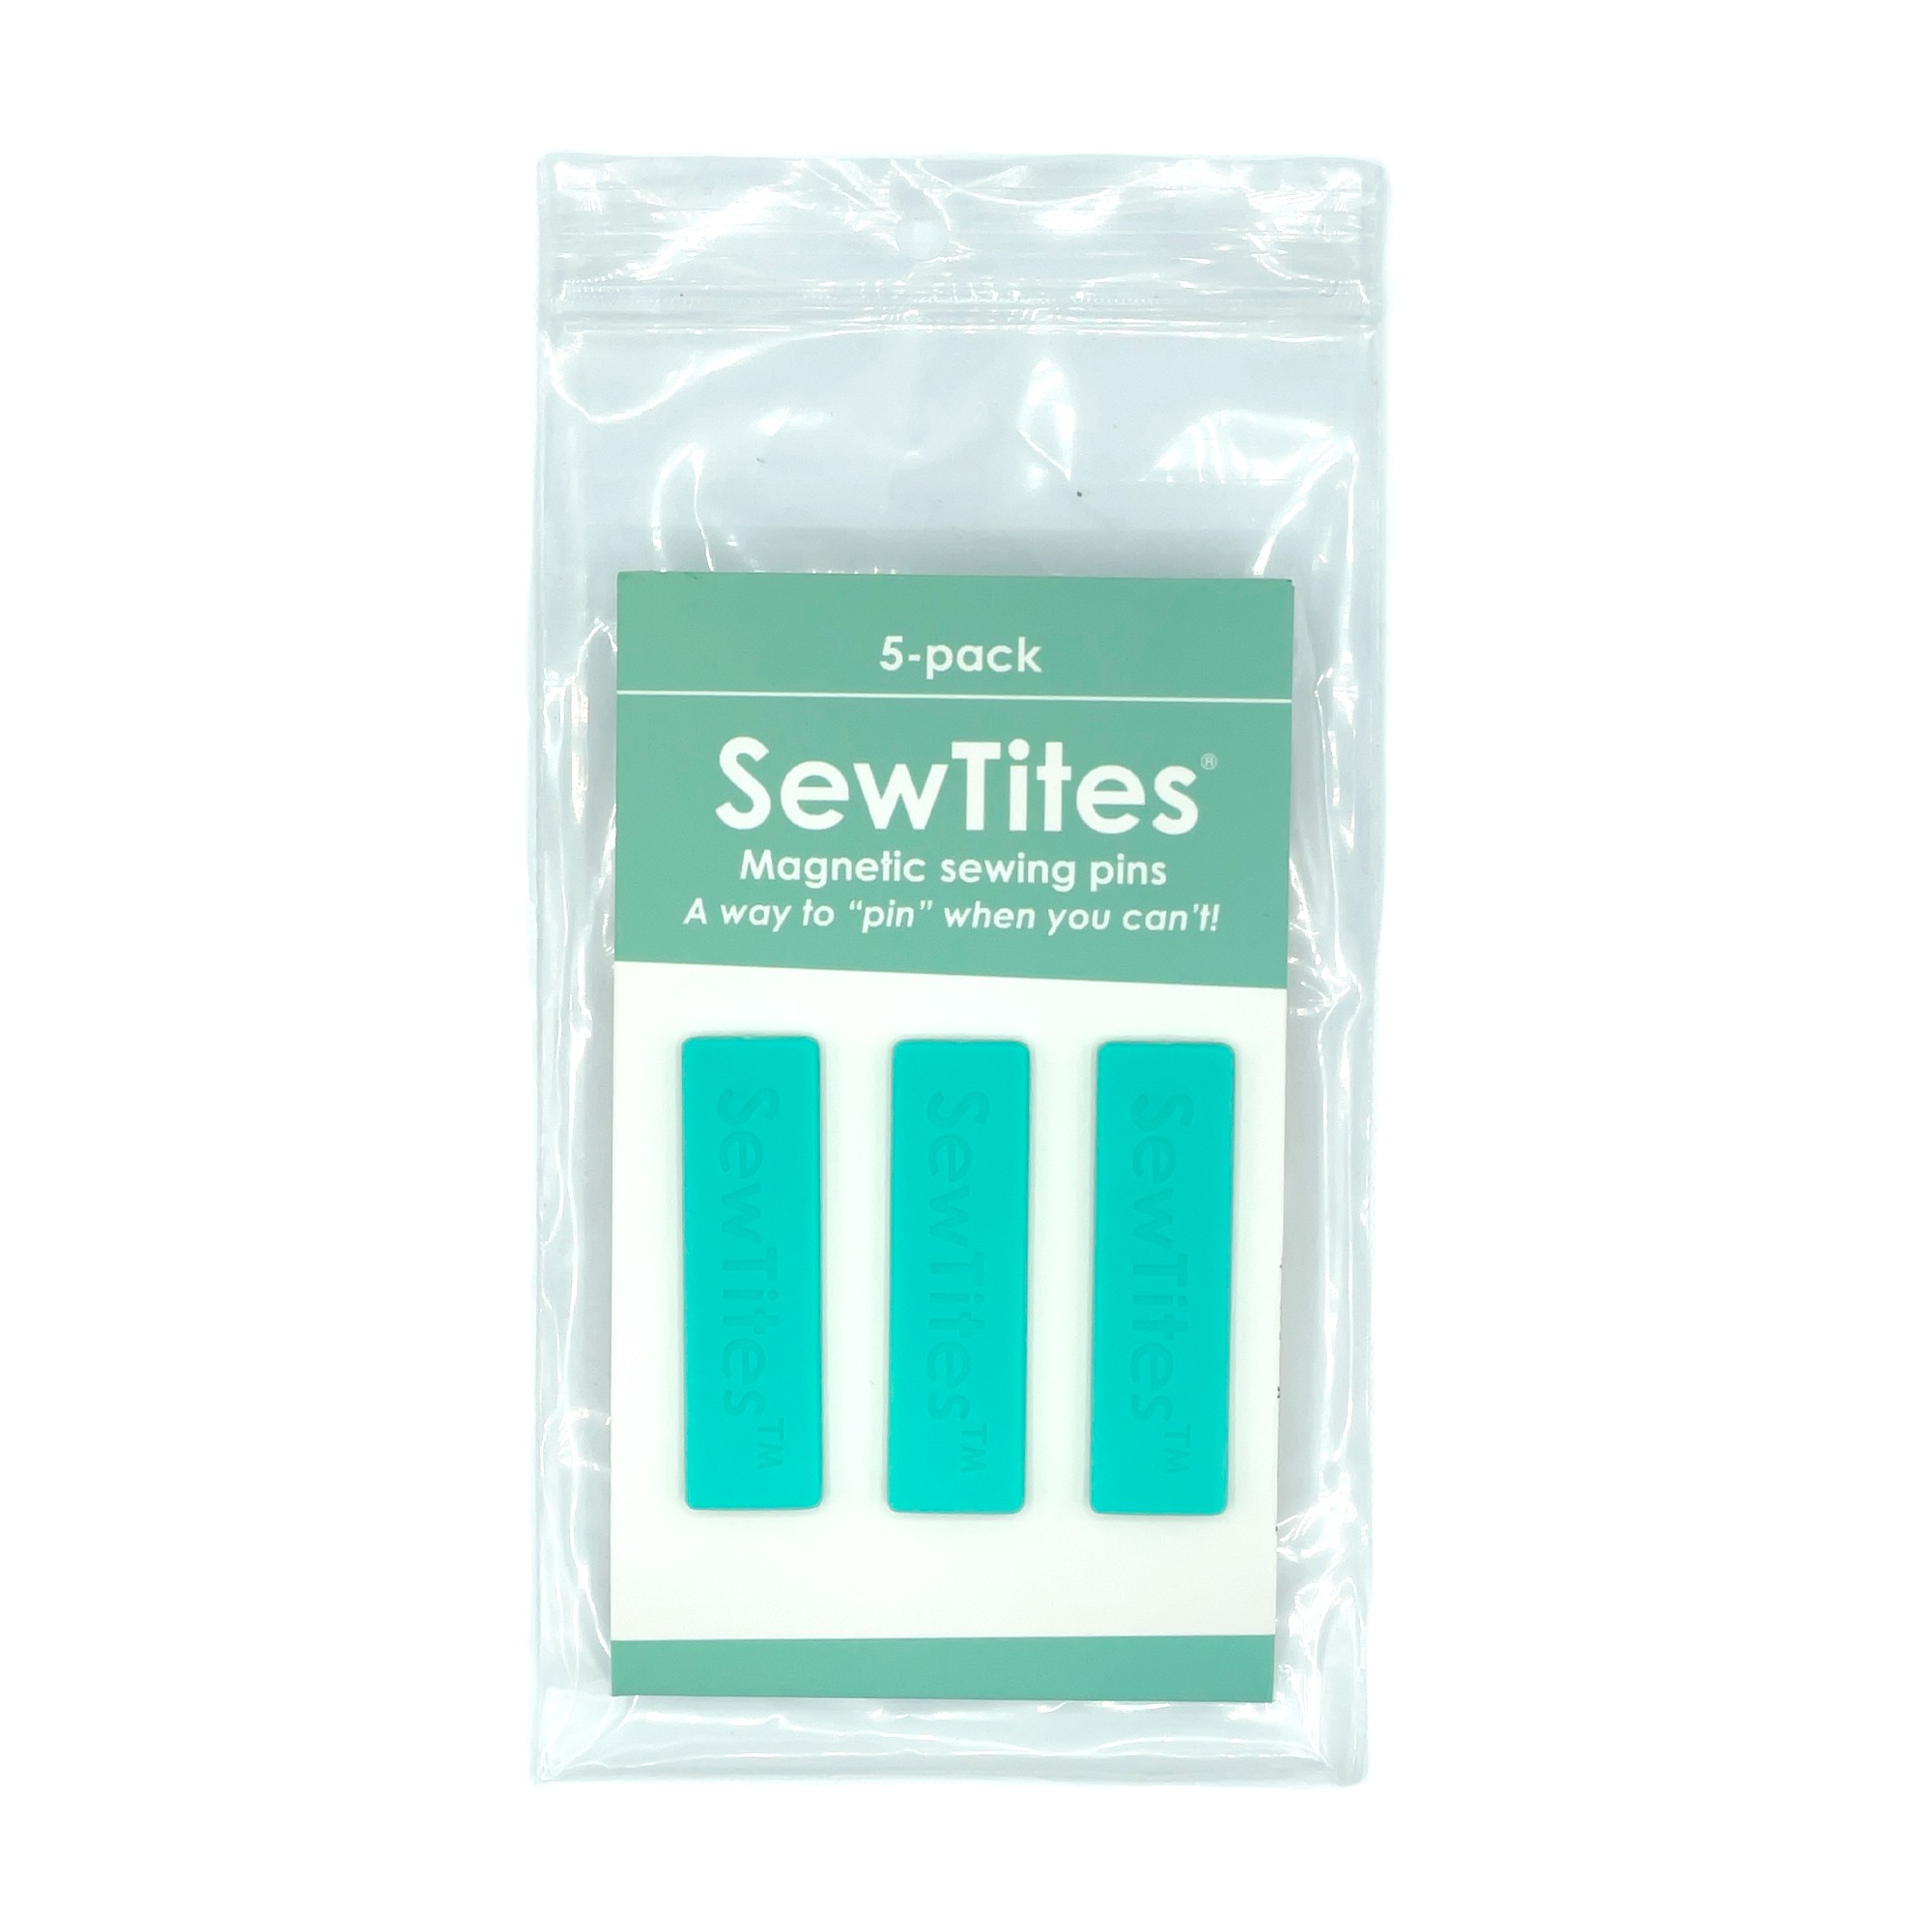 5 SewTites Magnetic Sewing Pins